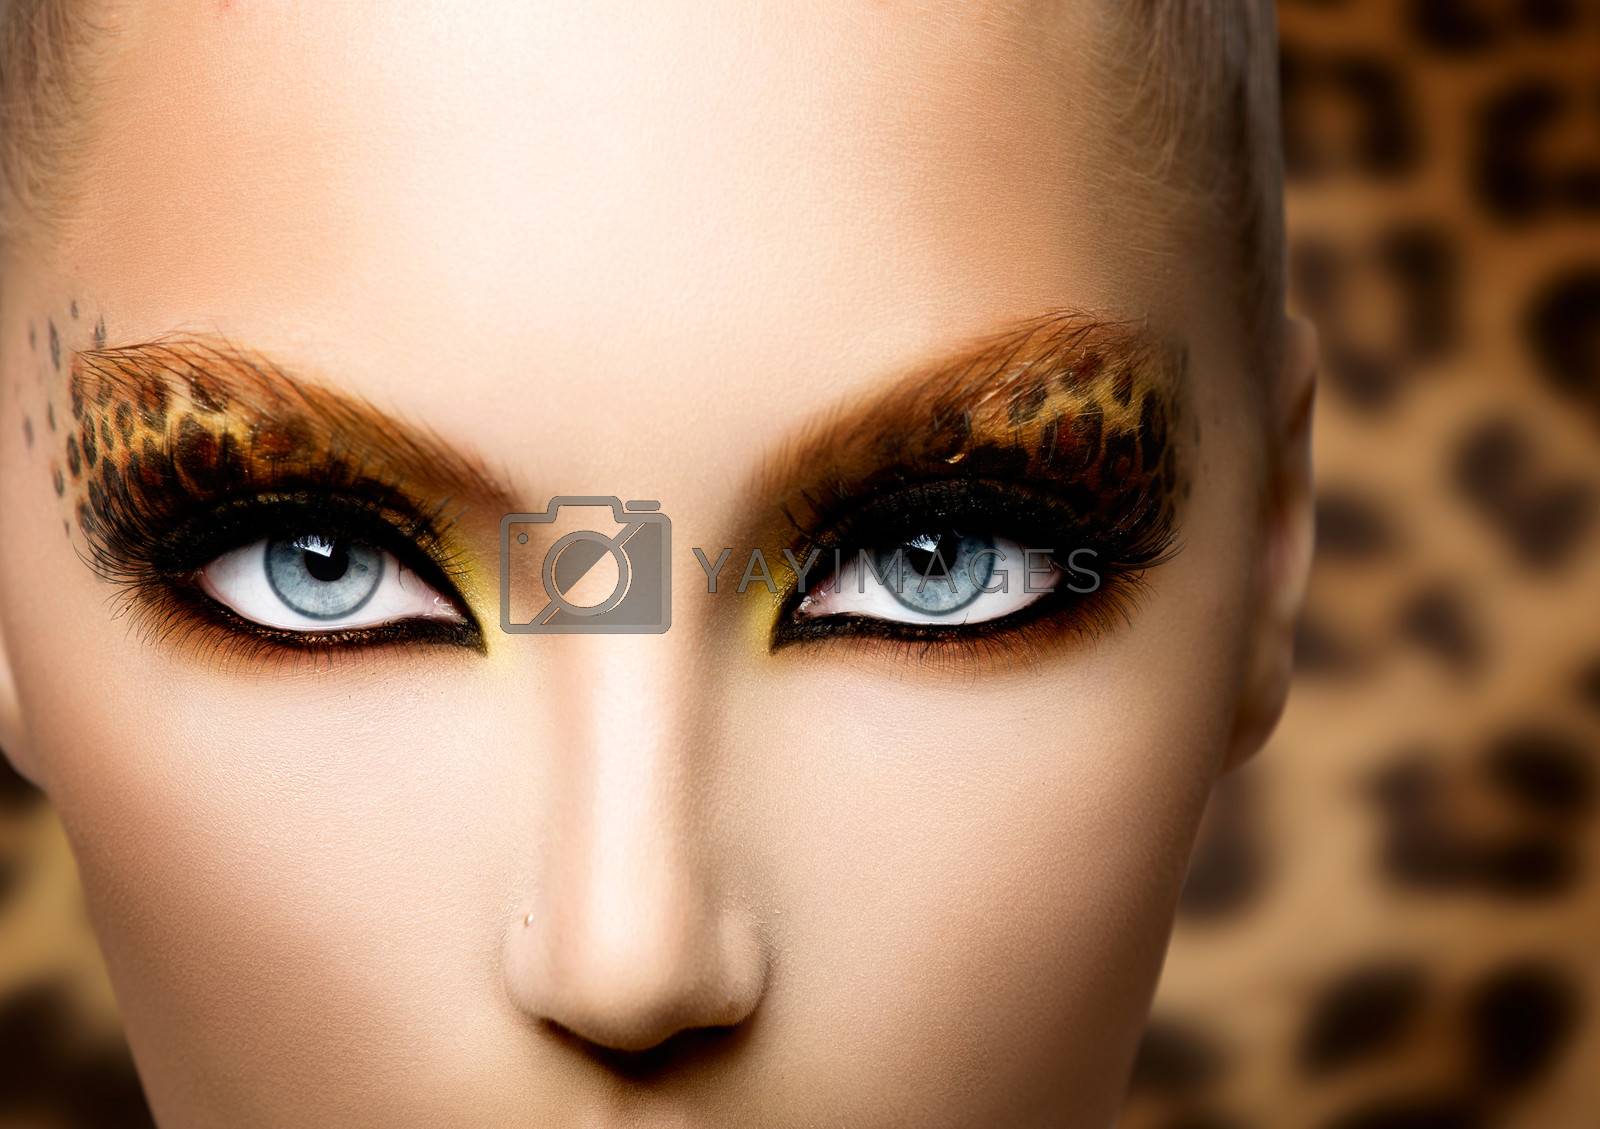 Royalty free image of Beauty Fashion Model Girl with Holiday Leopard Makeup by SubbotinaA